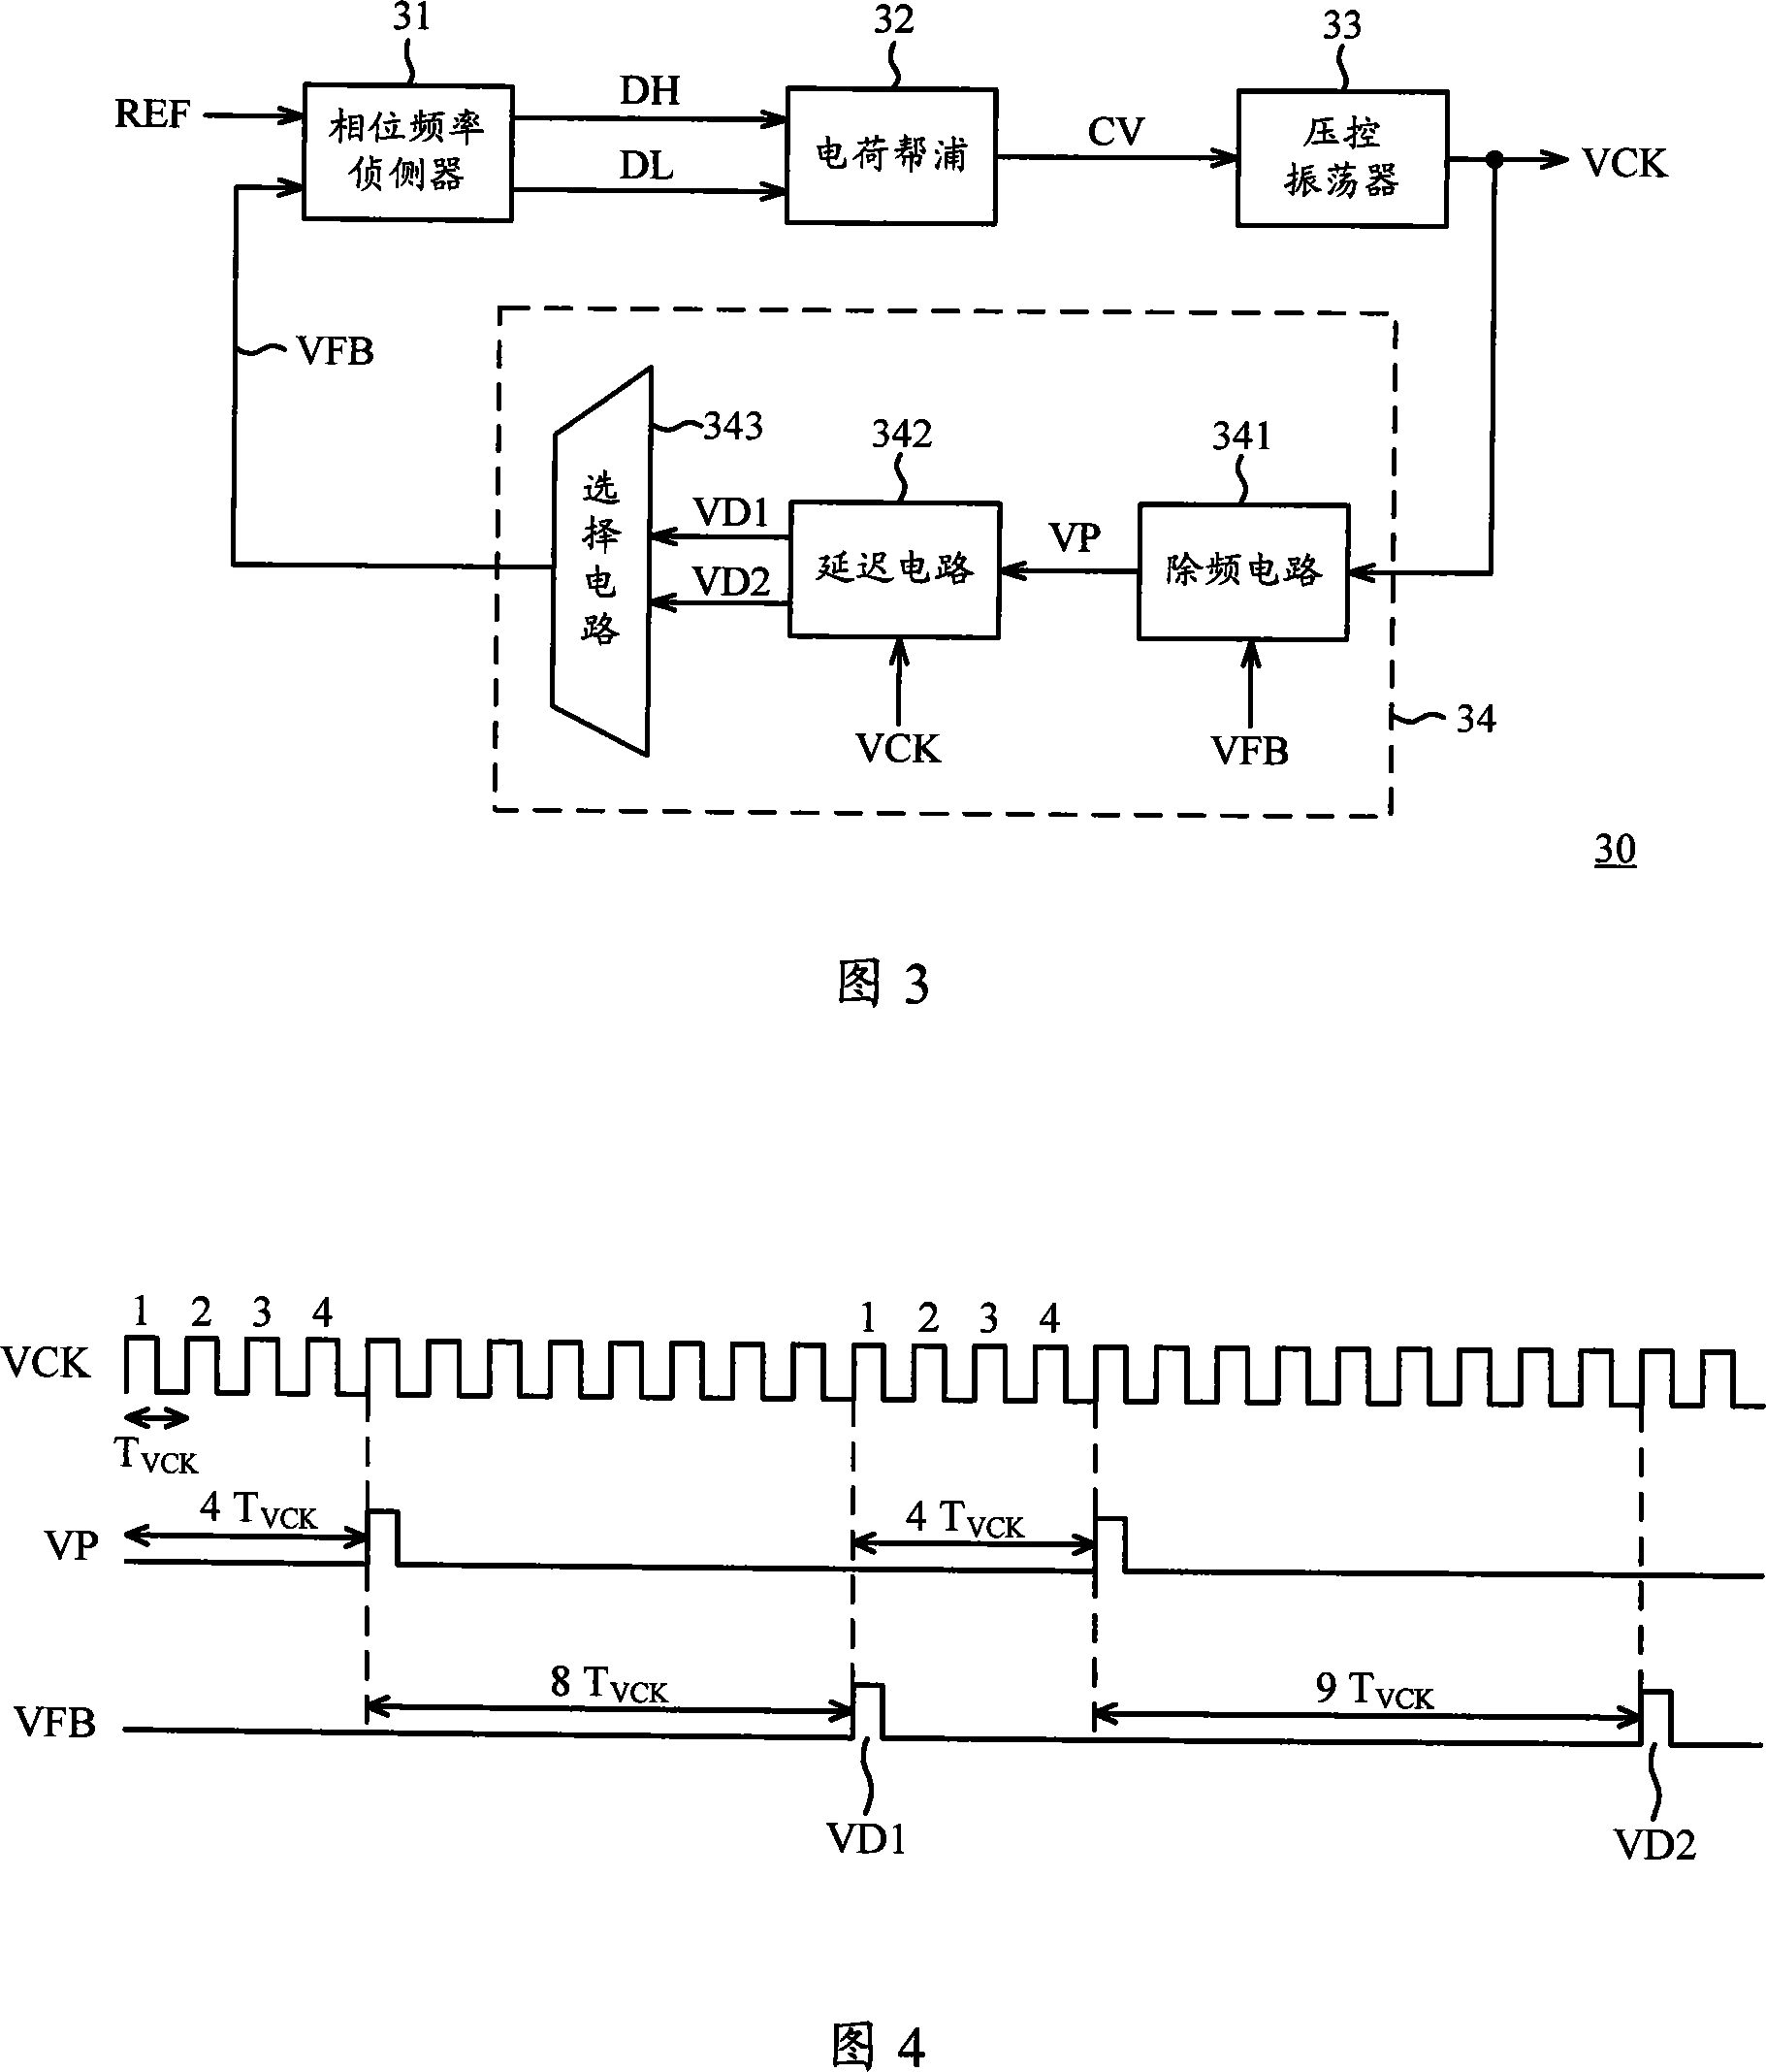 A non-integer frequency difference eliminator and phase-lock loop that can product non-integer real-time clock signal